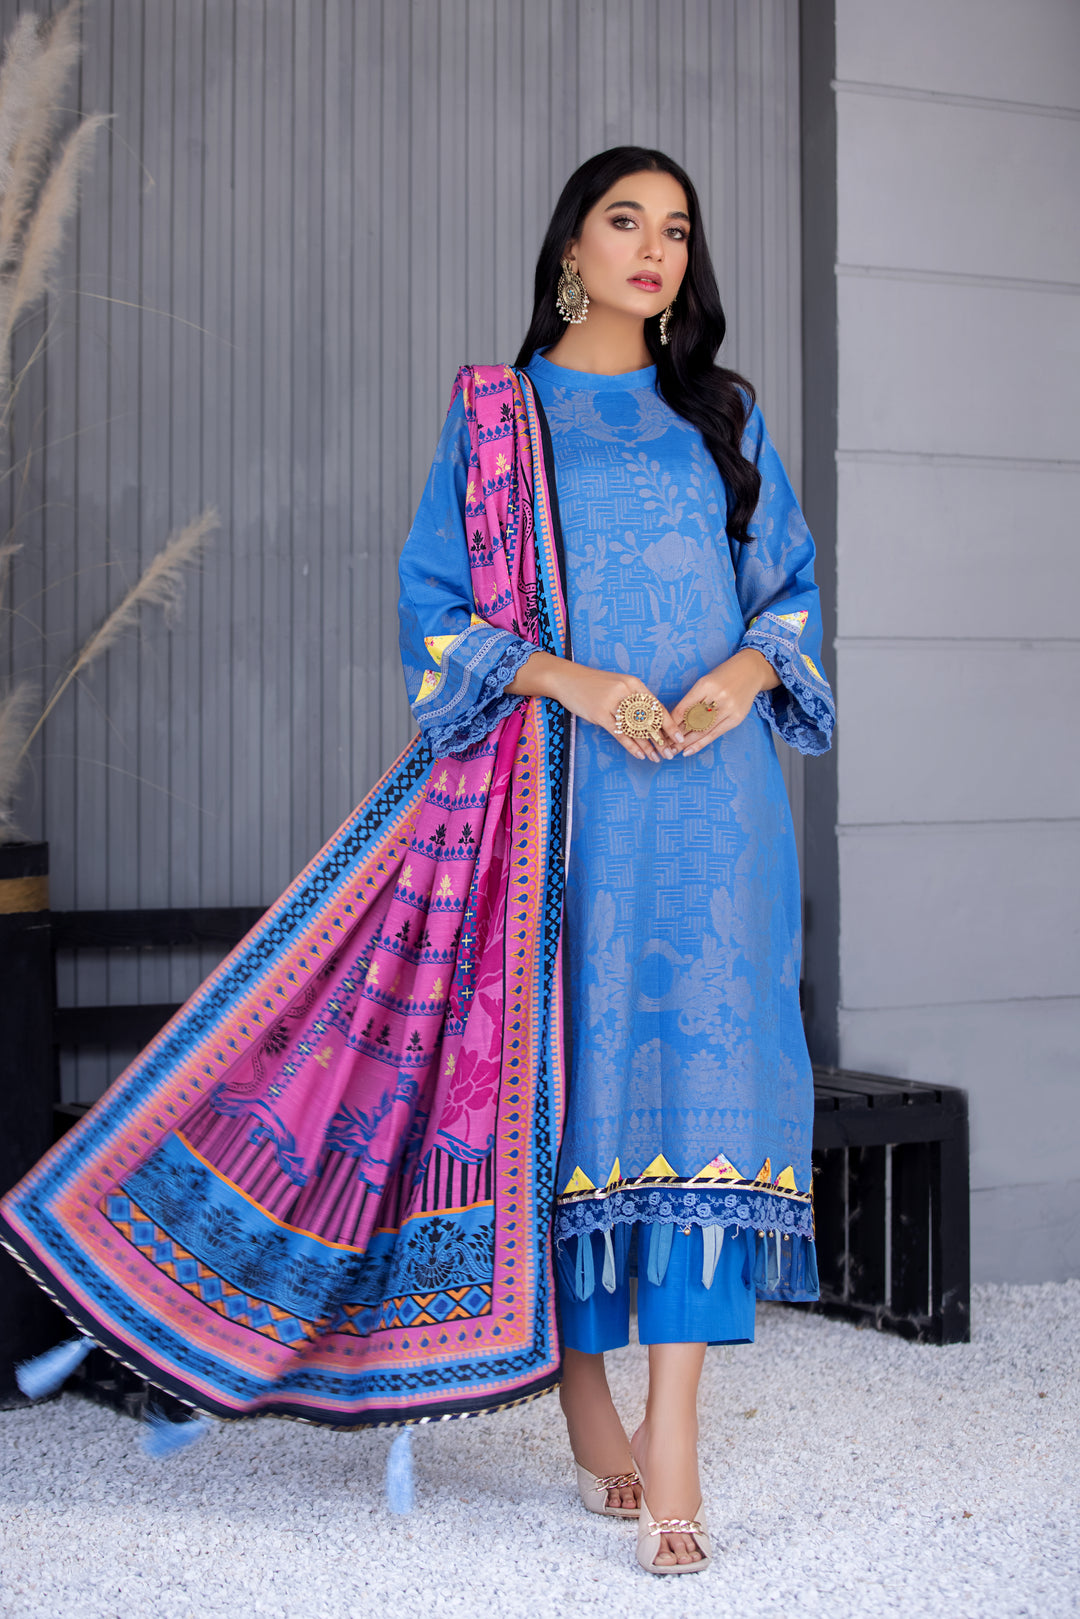 Clearance Sale at Jacquard - Upto30% on Entire Stock – Jacquard Clothing